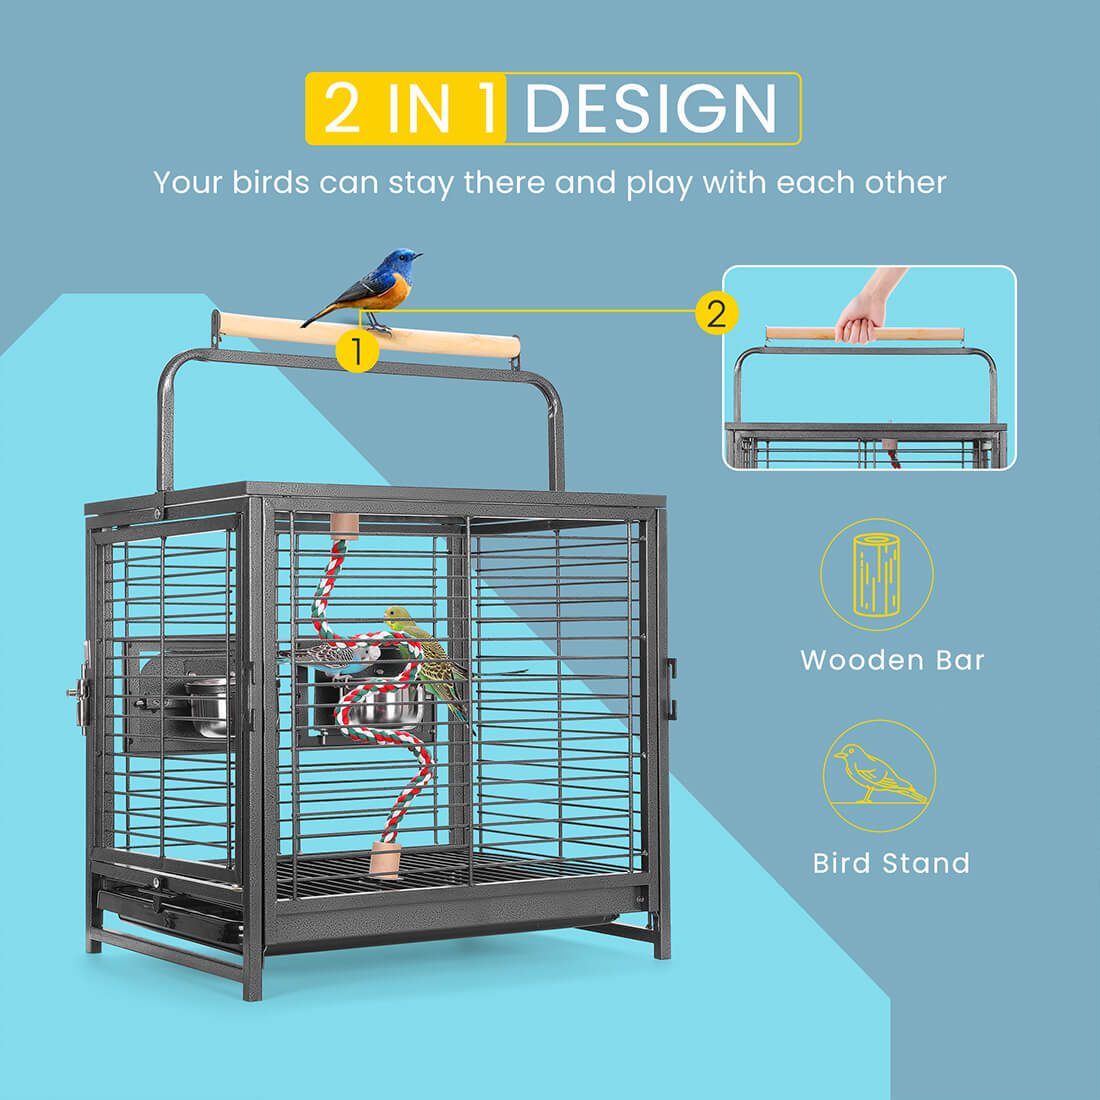 VIVOHOME 19 Inch Wrought Iron Bird Travel Carrier Cage for Parrots Conures Lovebird Cockatiel Parakeets